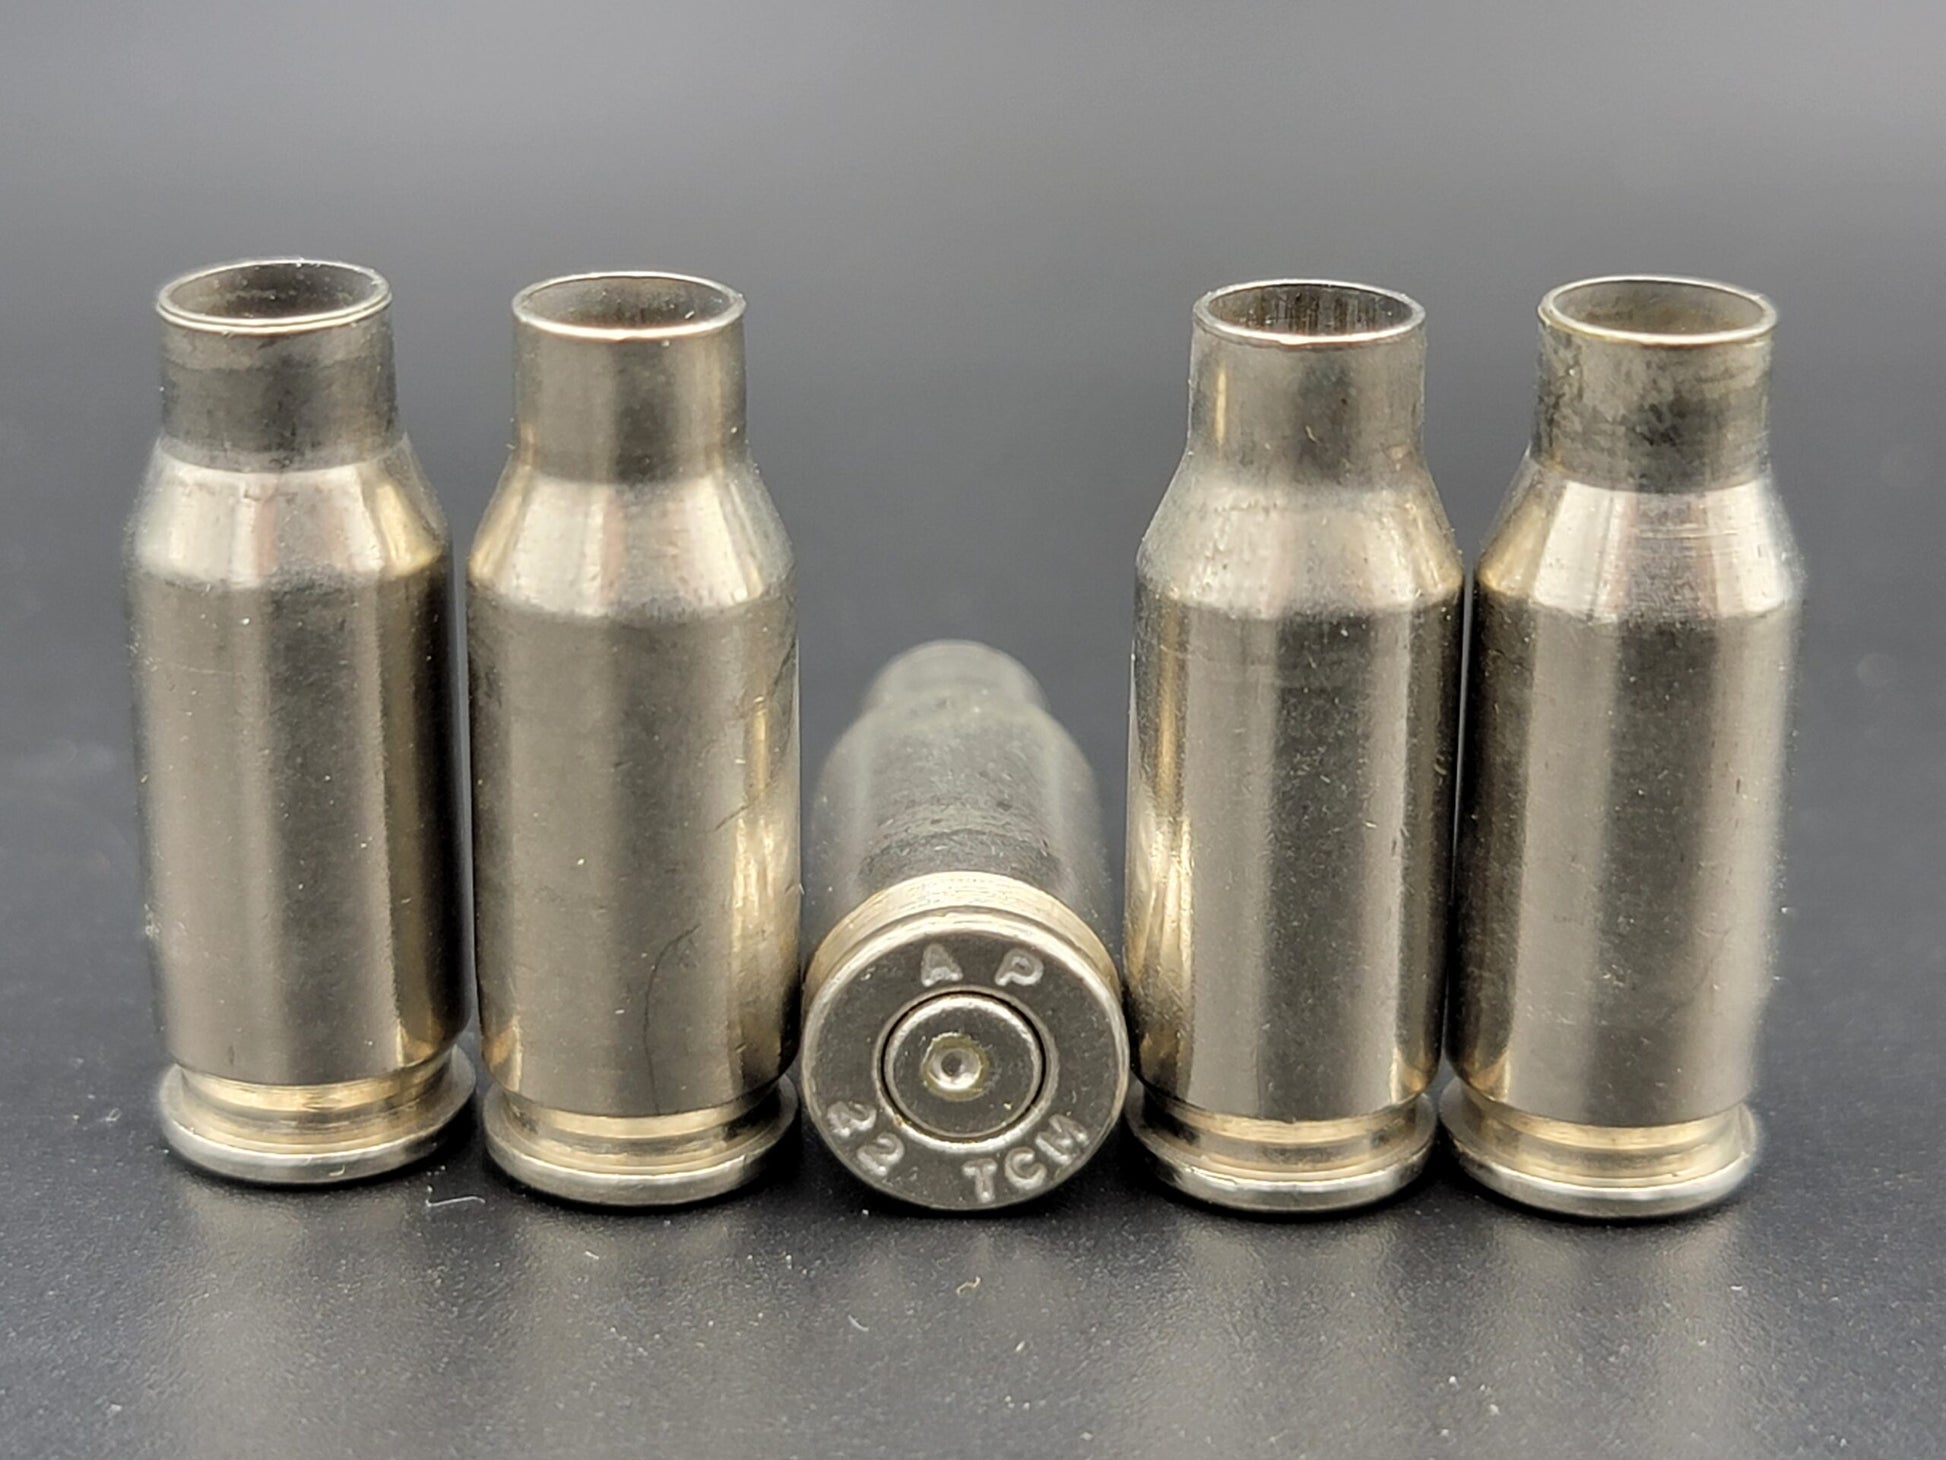 22 TCM once fired rifle nickel. Hand sorted from reputable indoor/military ranges for reloading. Reliable spent casings for precision shooting.